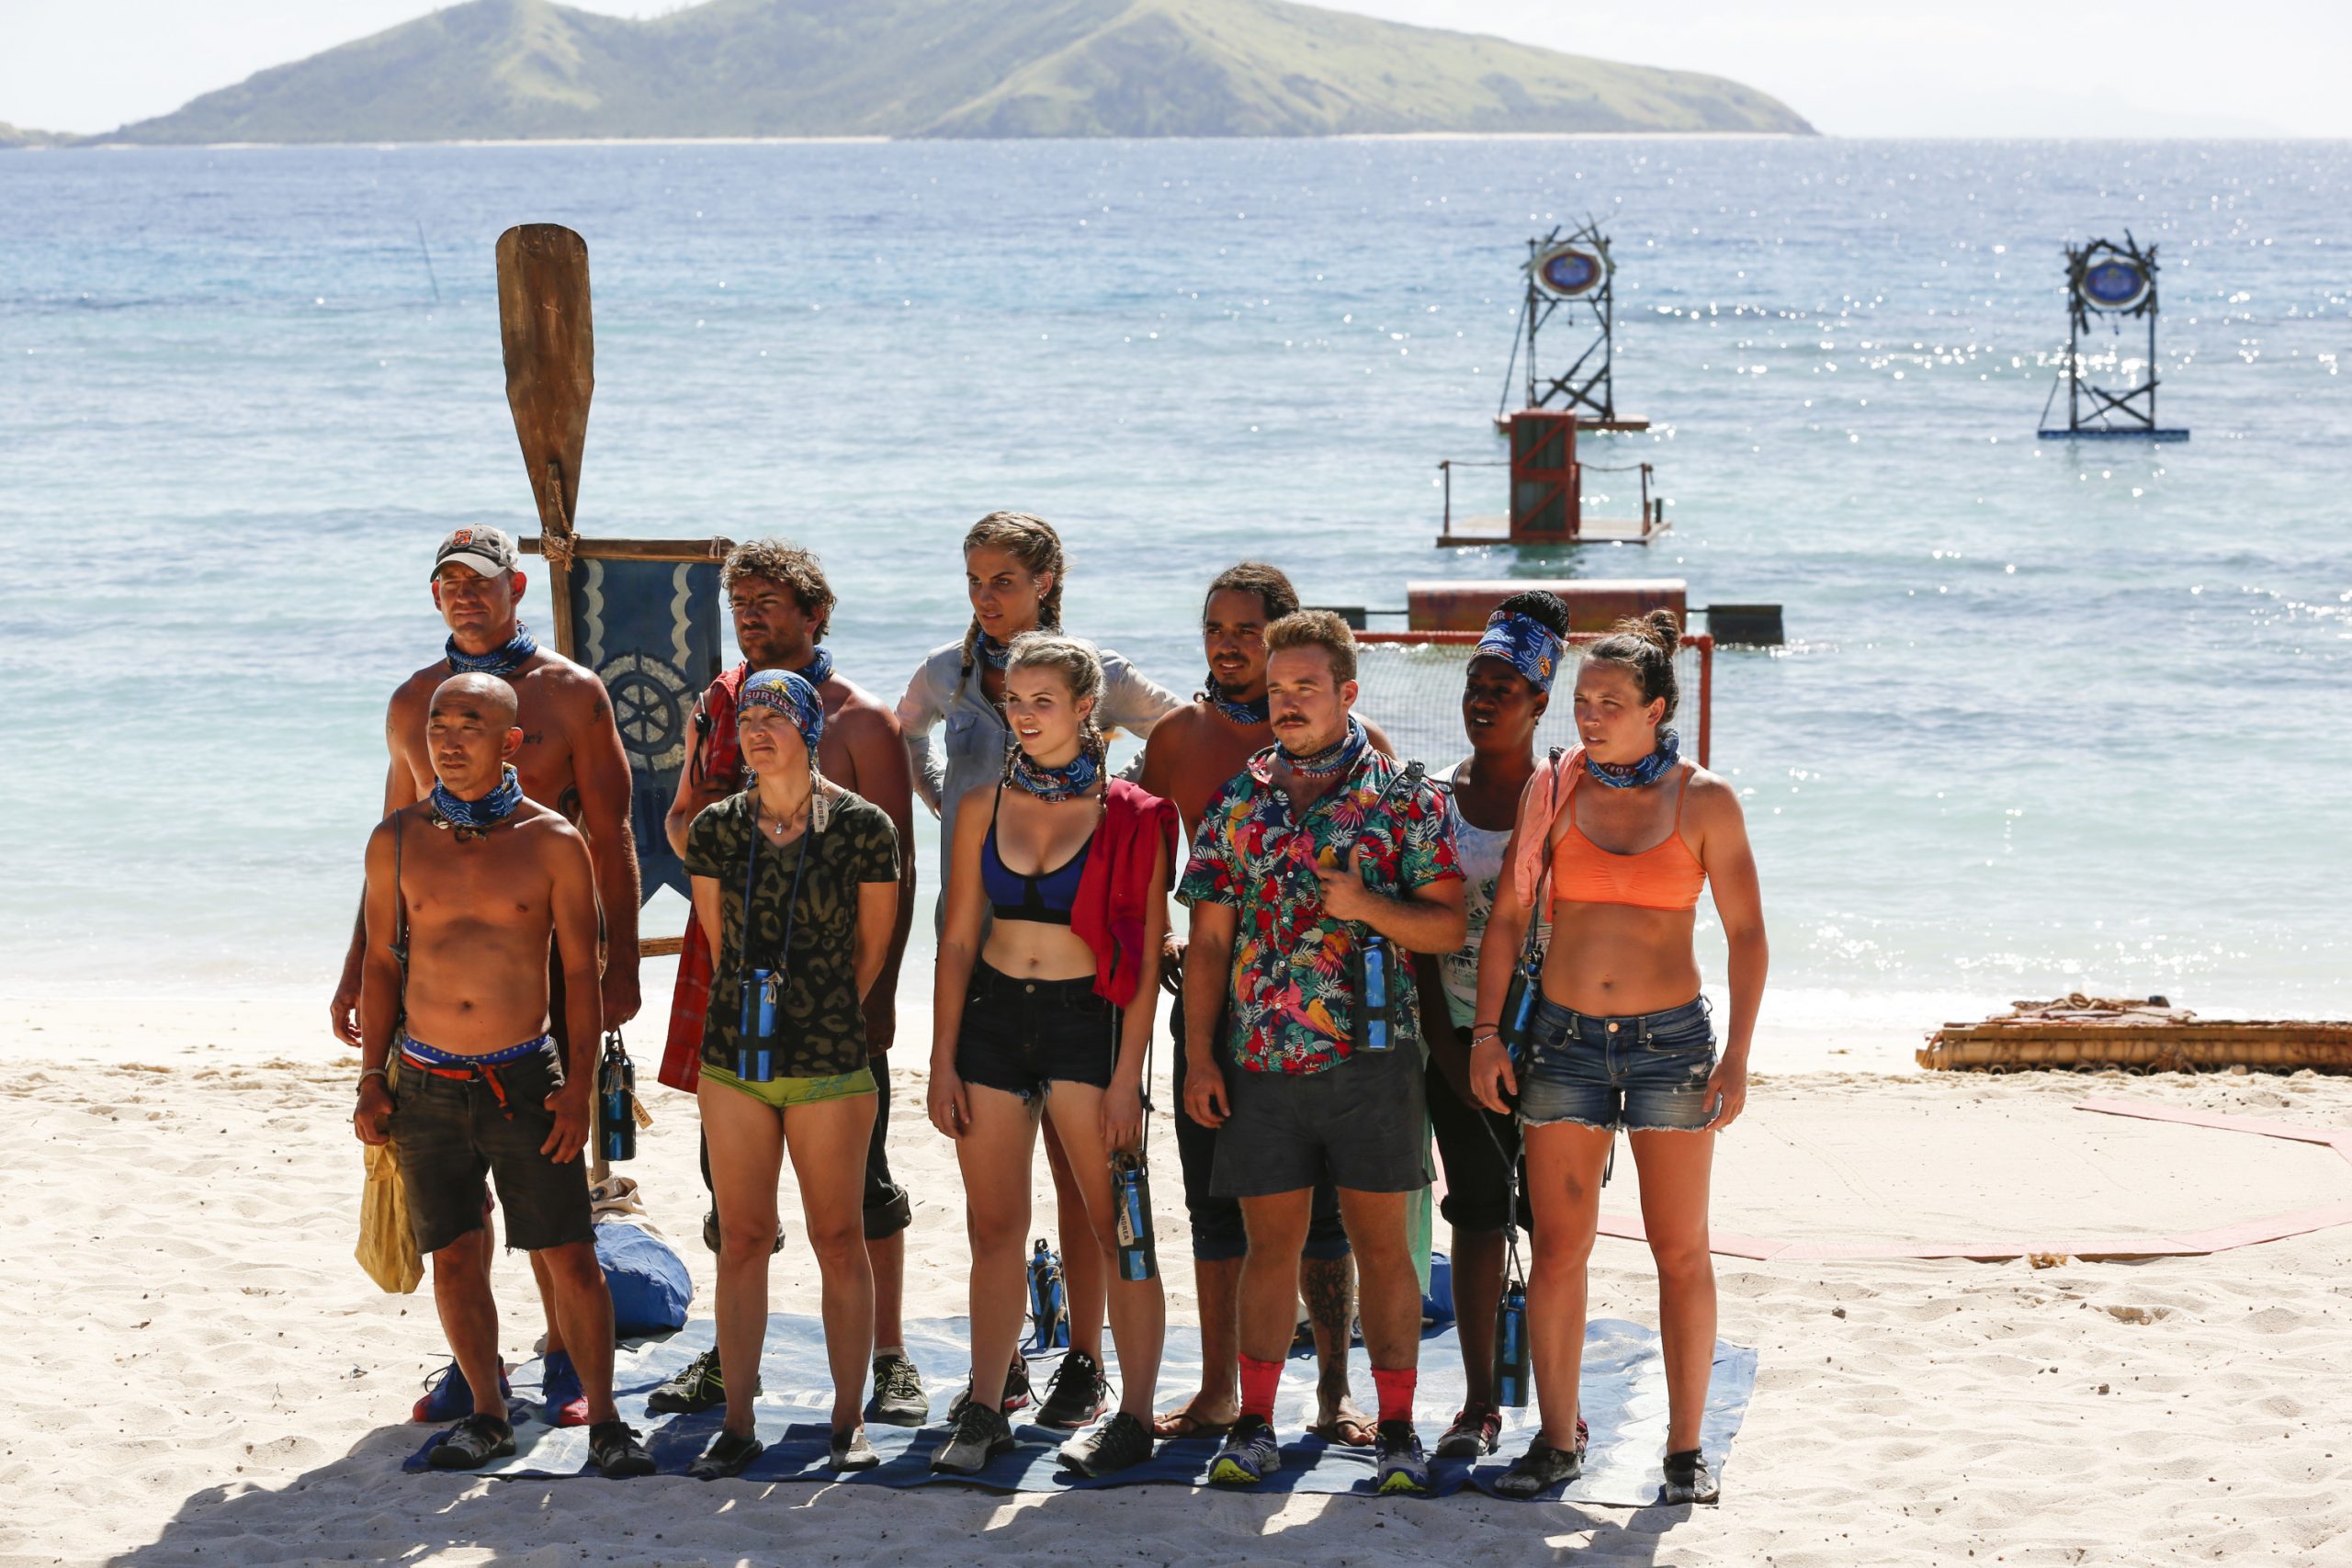 Brad Culpepper, Tai Trang, Malcolm Freberg, Debbie Wanner, James J.T Thomas, Sierra Dawn-Thomas, Andrea Boehlke, Oscar Ozzy Lusth, Zeke Smith, Cirie Fields and Sarah Lacina standing on the beach and waiting for a challenge